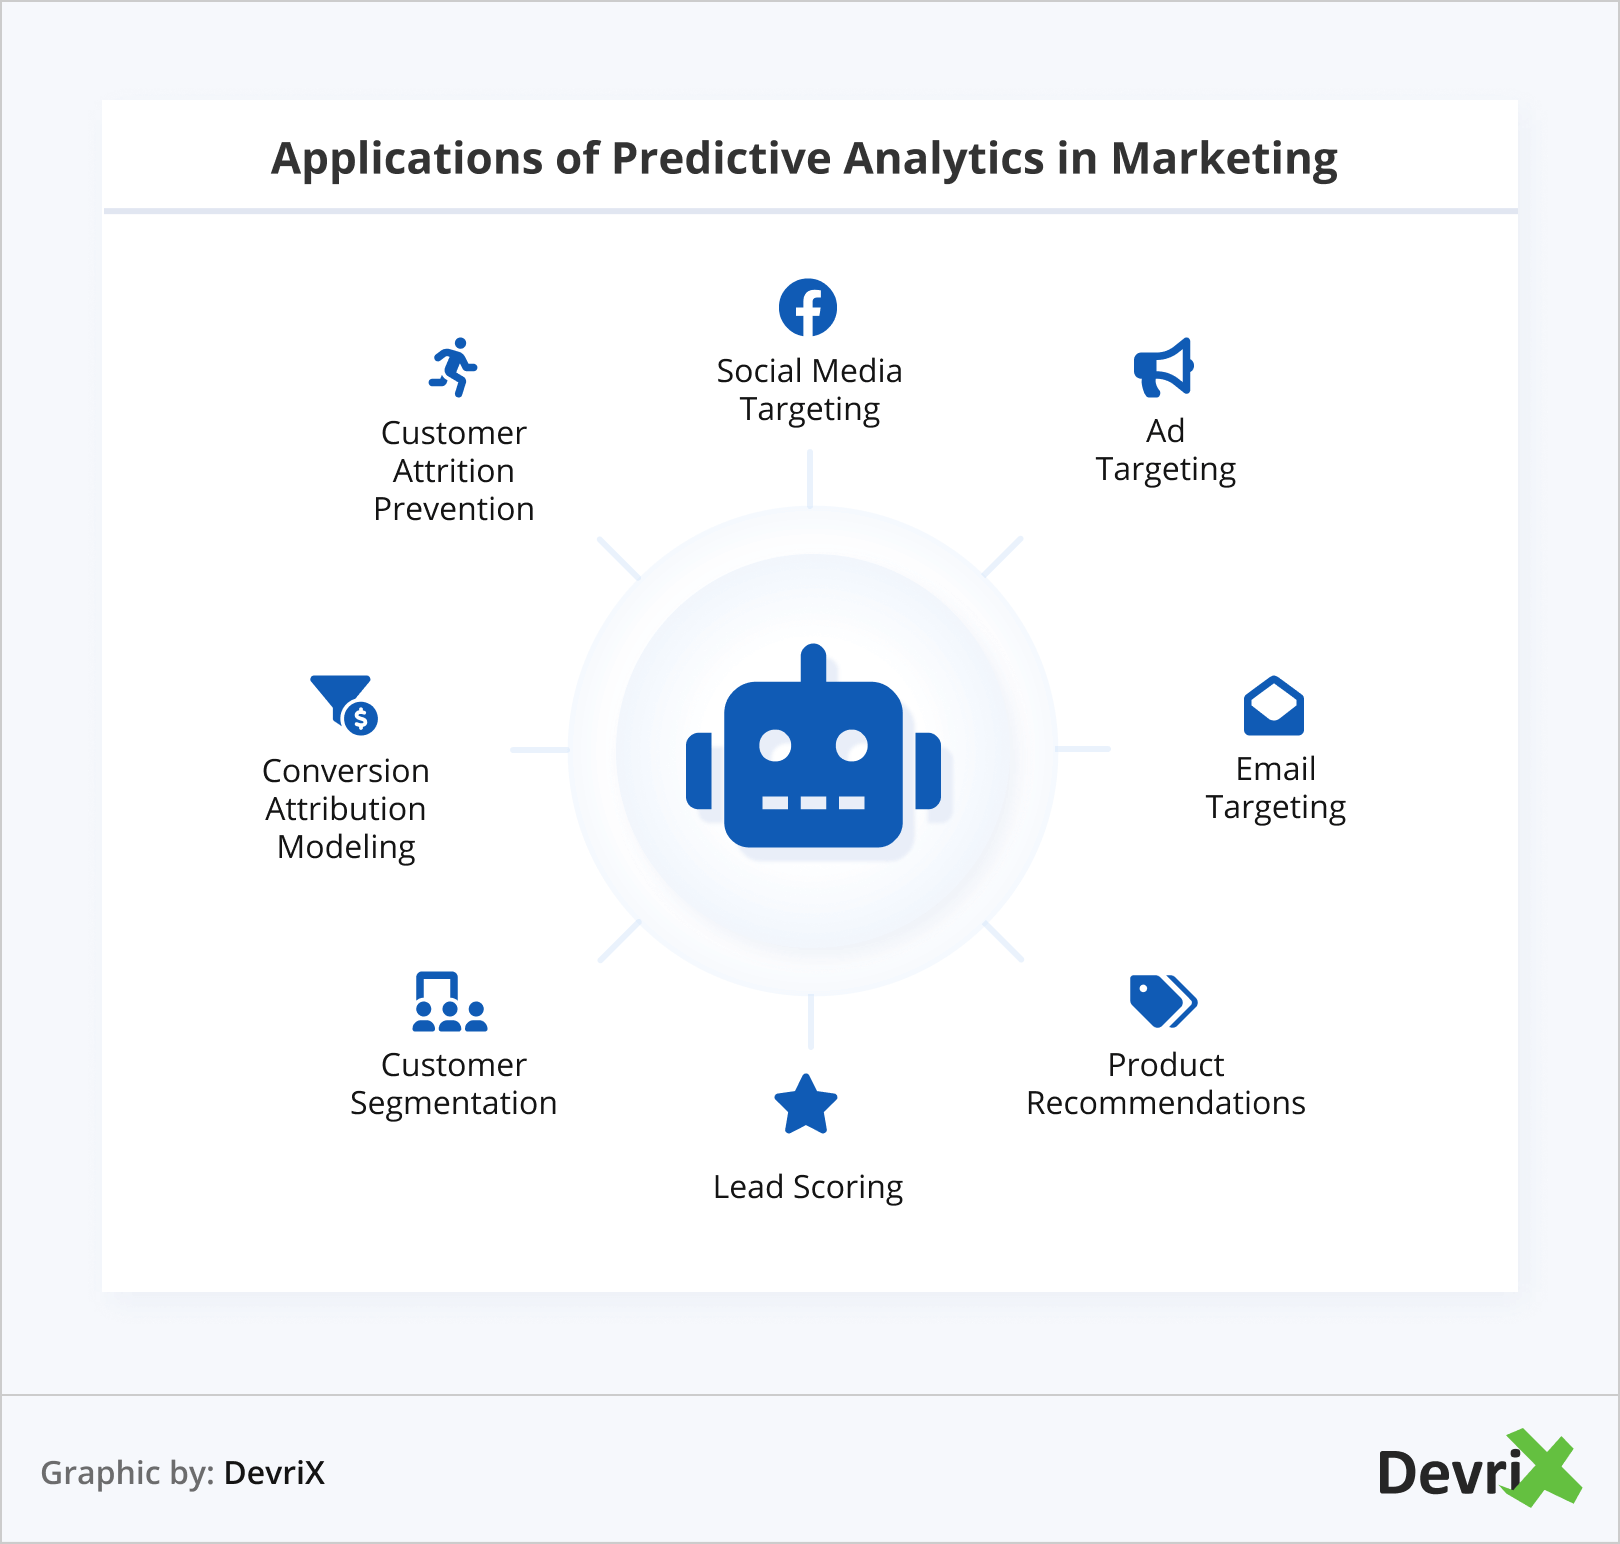 Applications of Predictive Analytics in Marketing